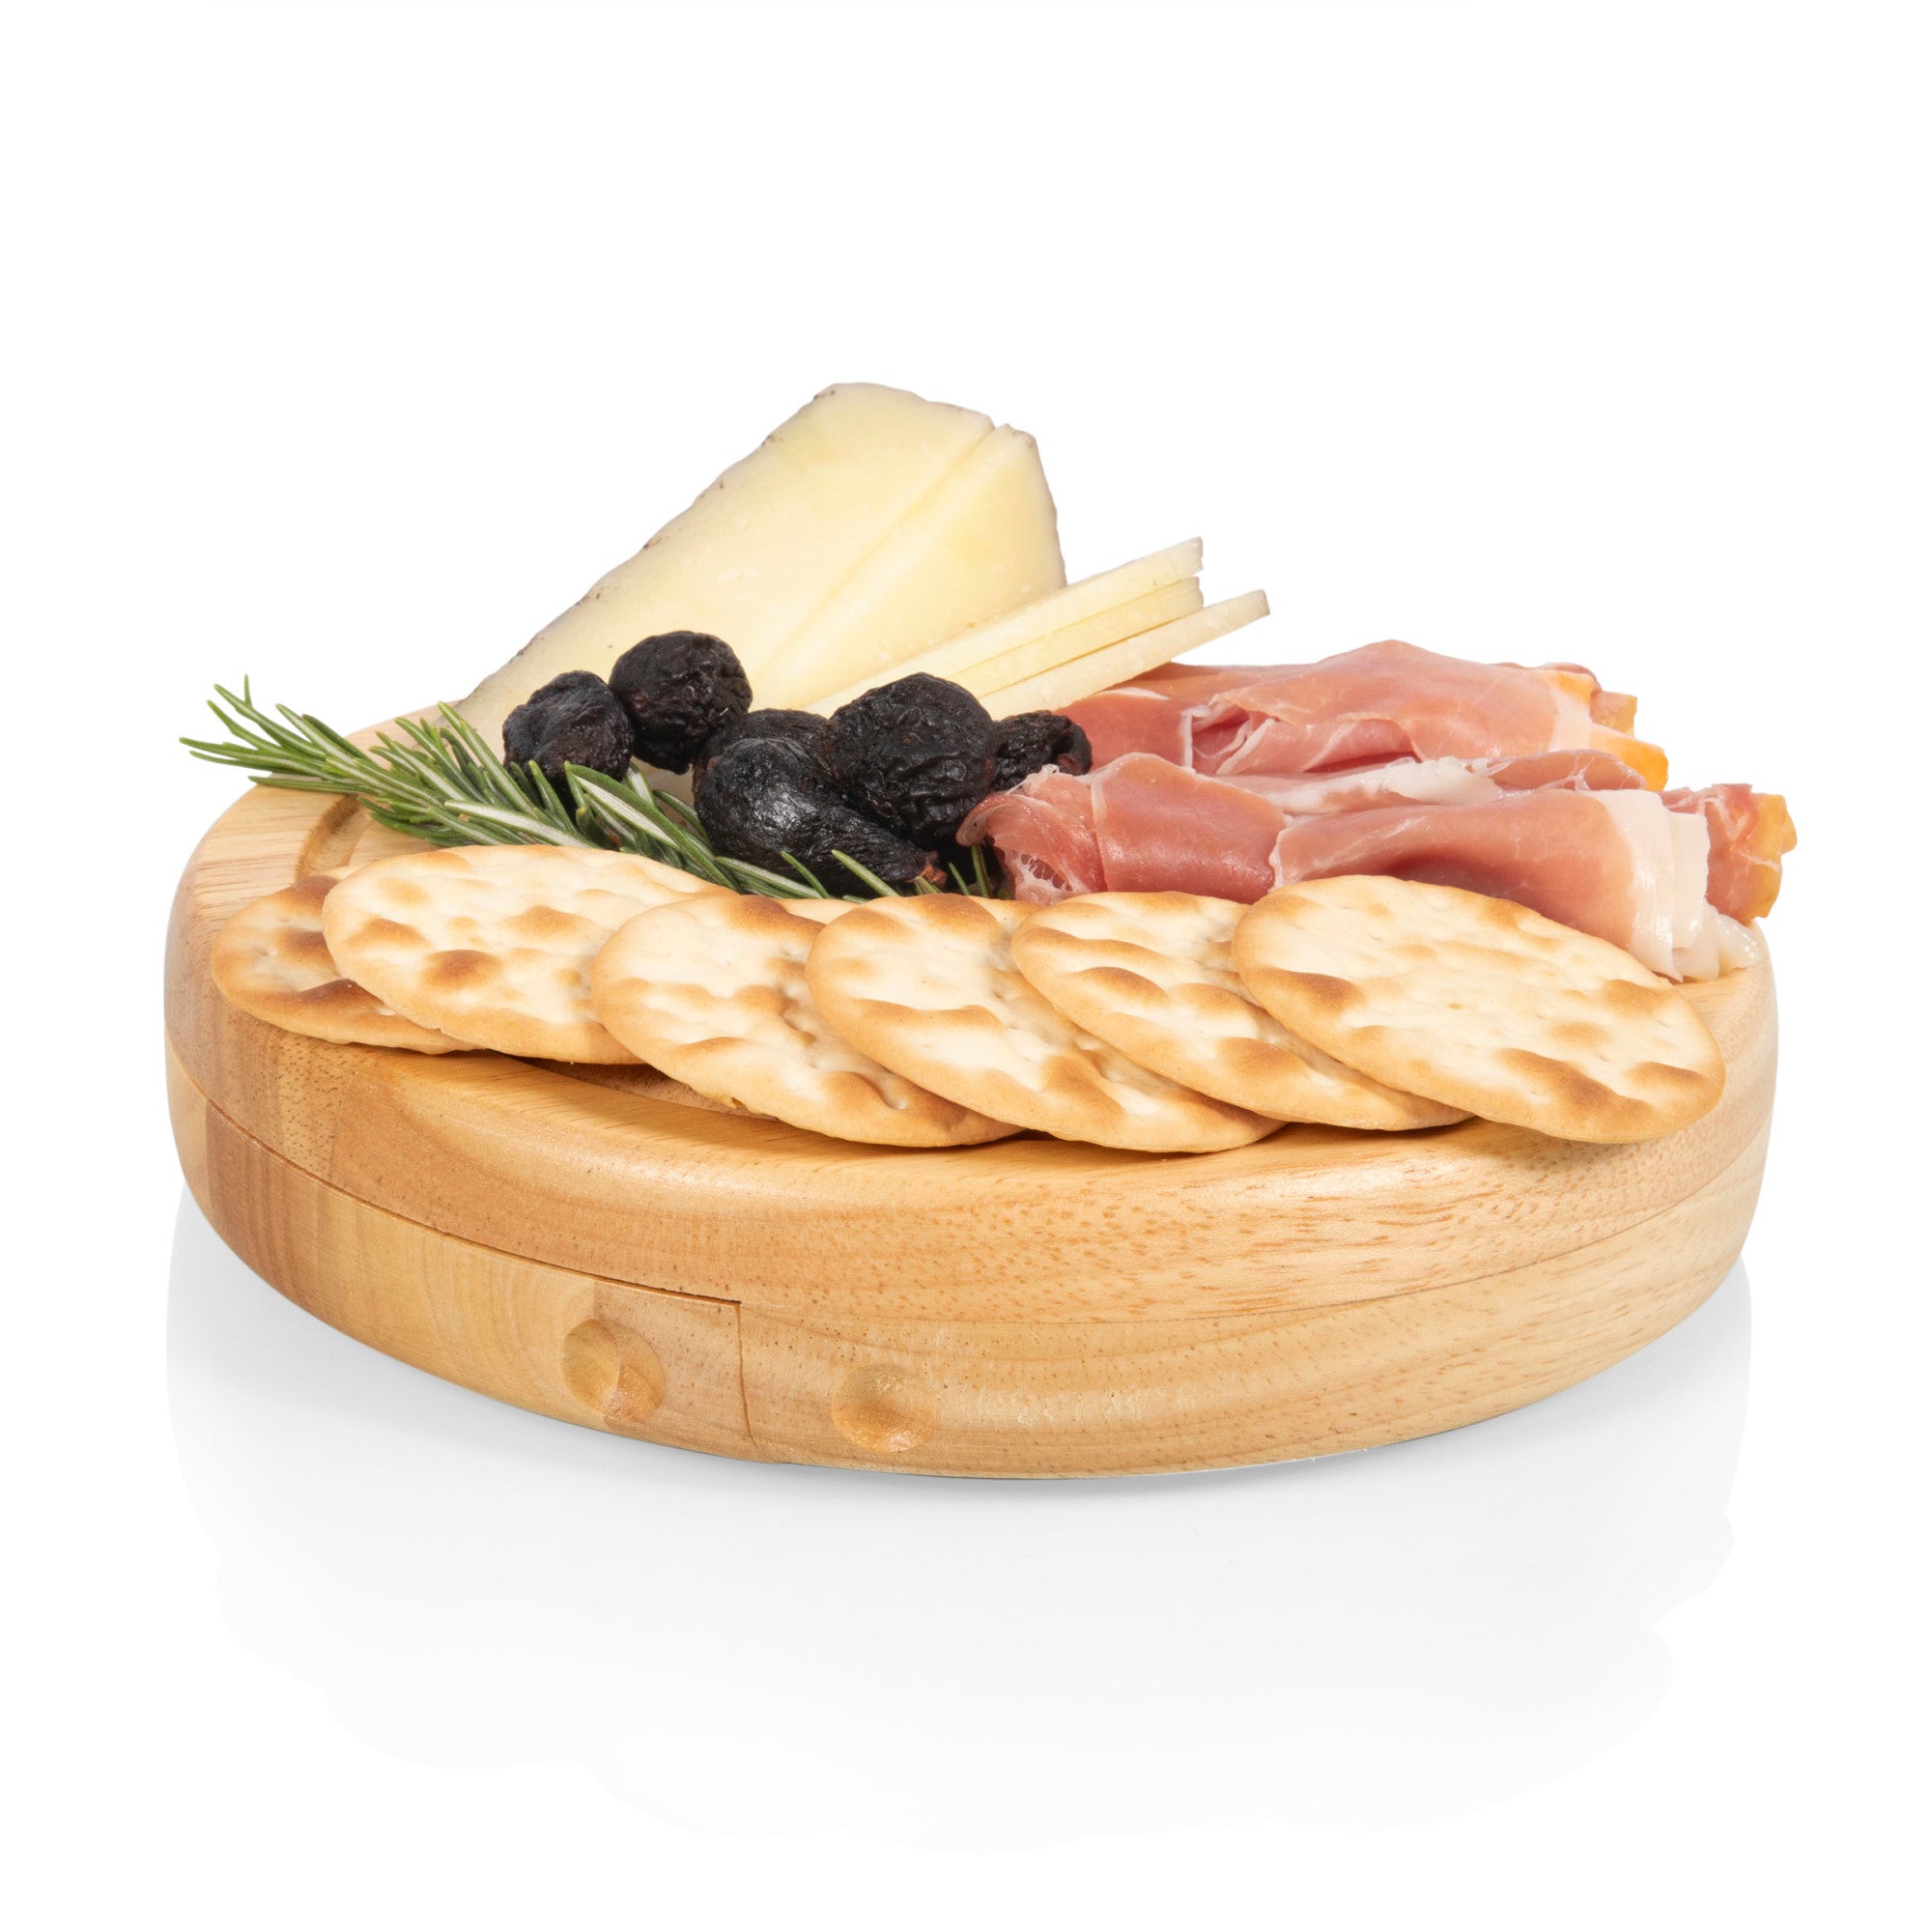 Miami Marlins - Brie Cheese Cutting Board & Tools Set